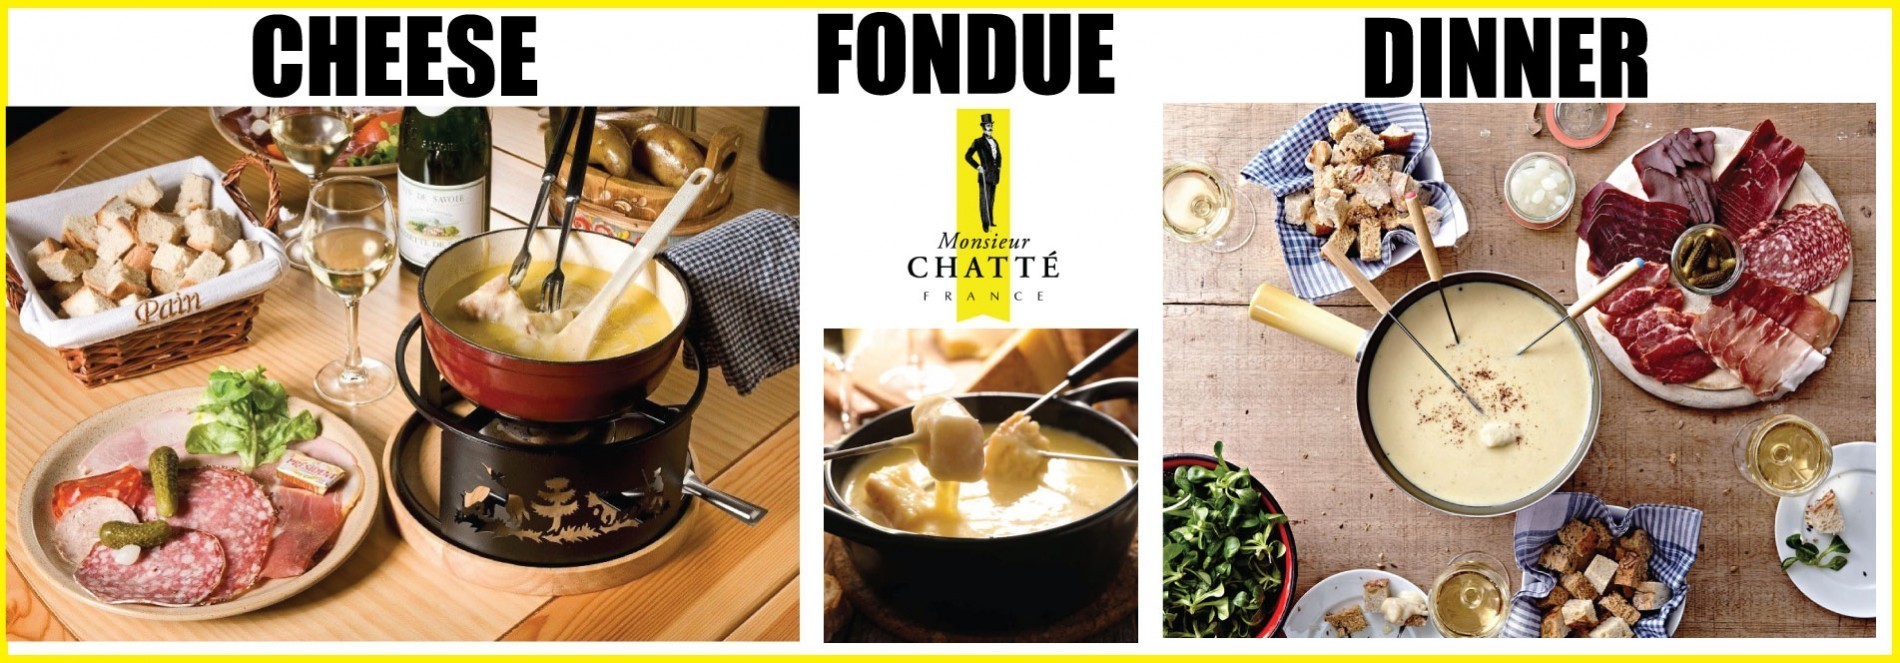 Cheese Fondue Dinner for 2 px